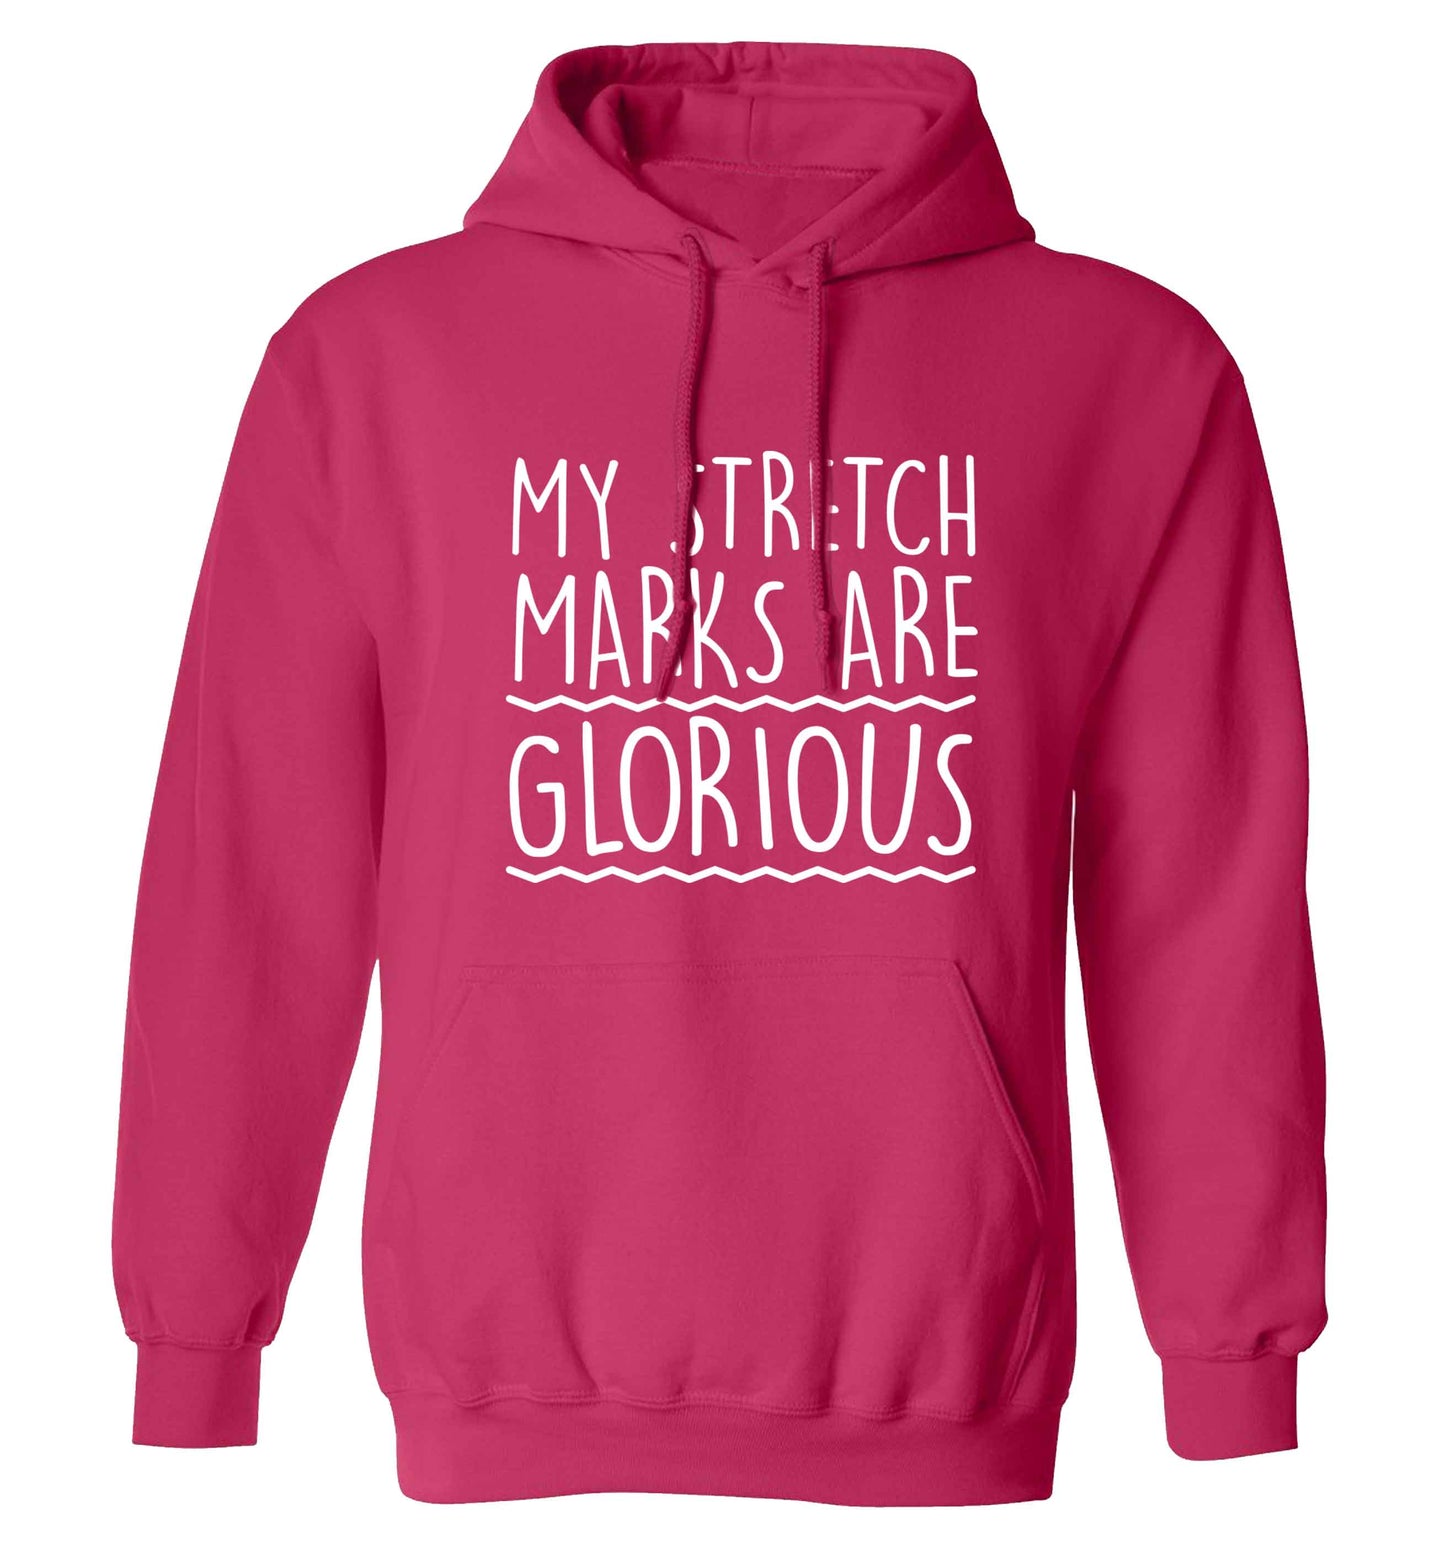 My stretch marks are glorious adults unisex pink hoodie 2XL